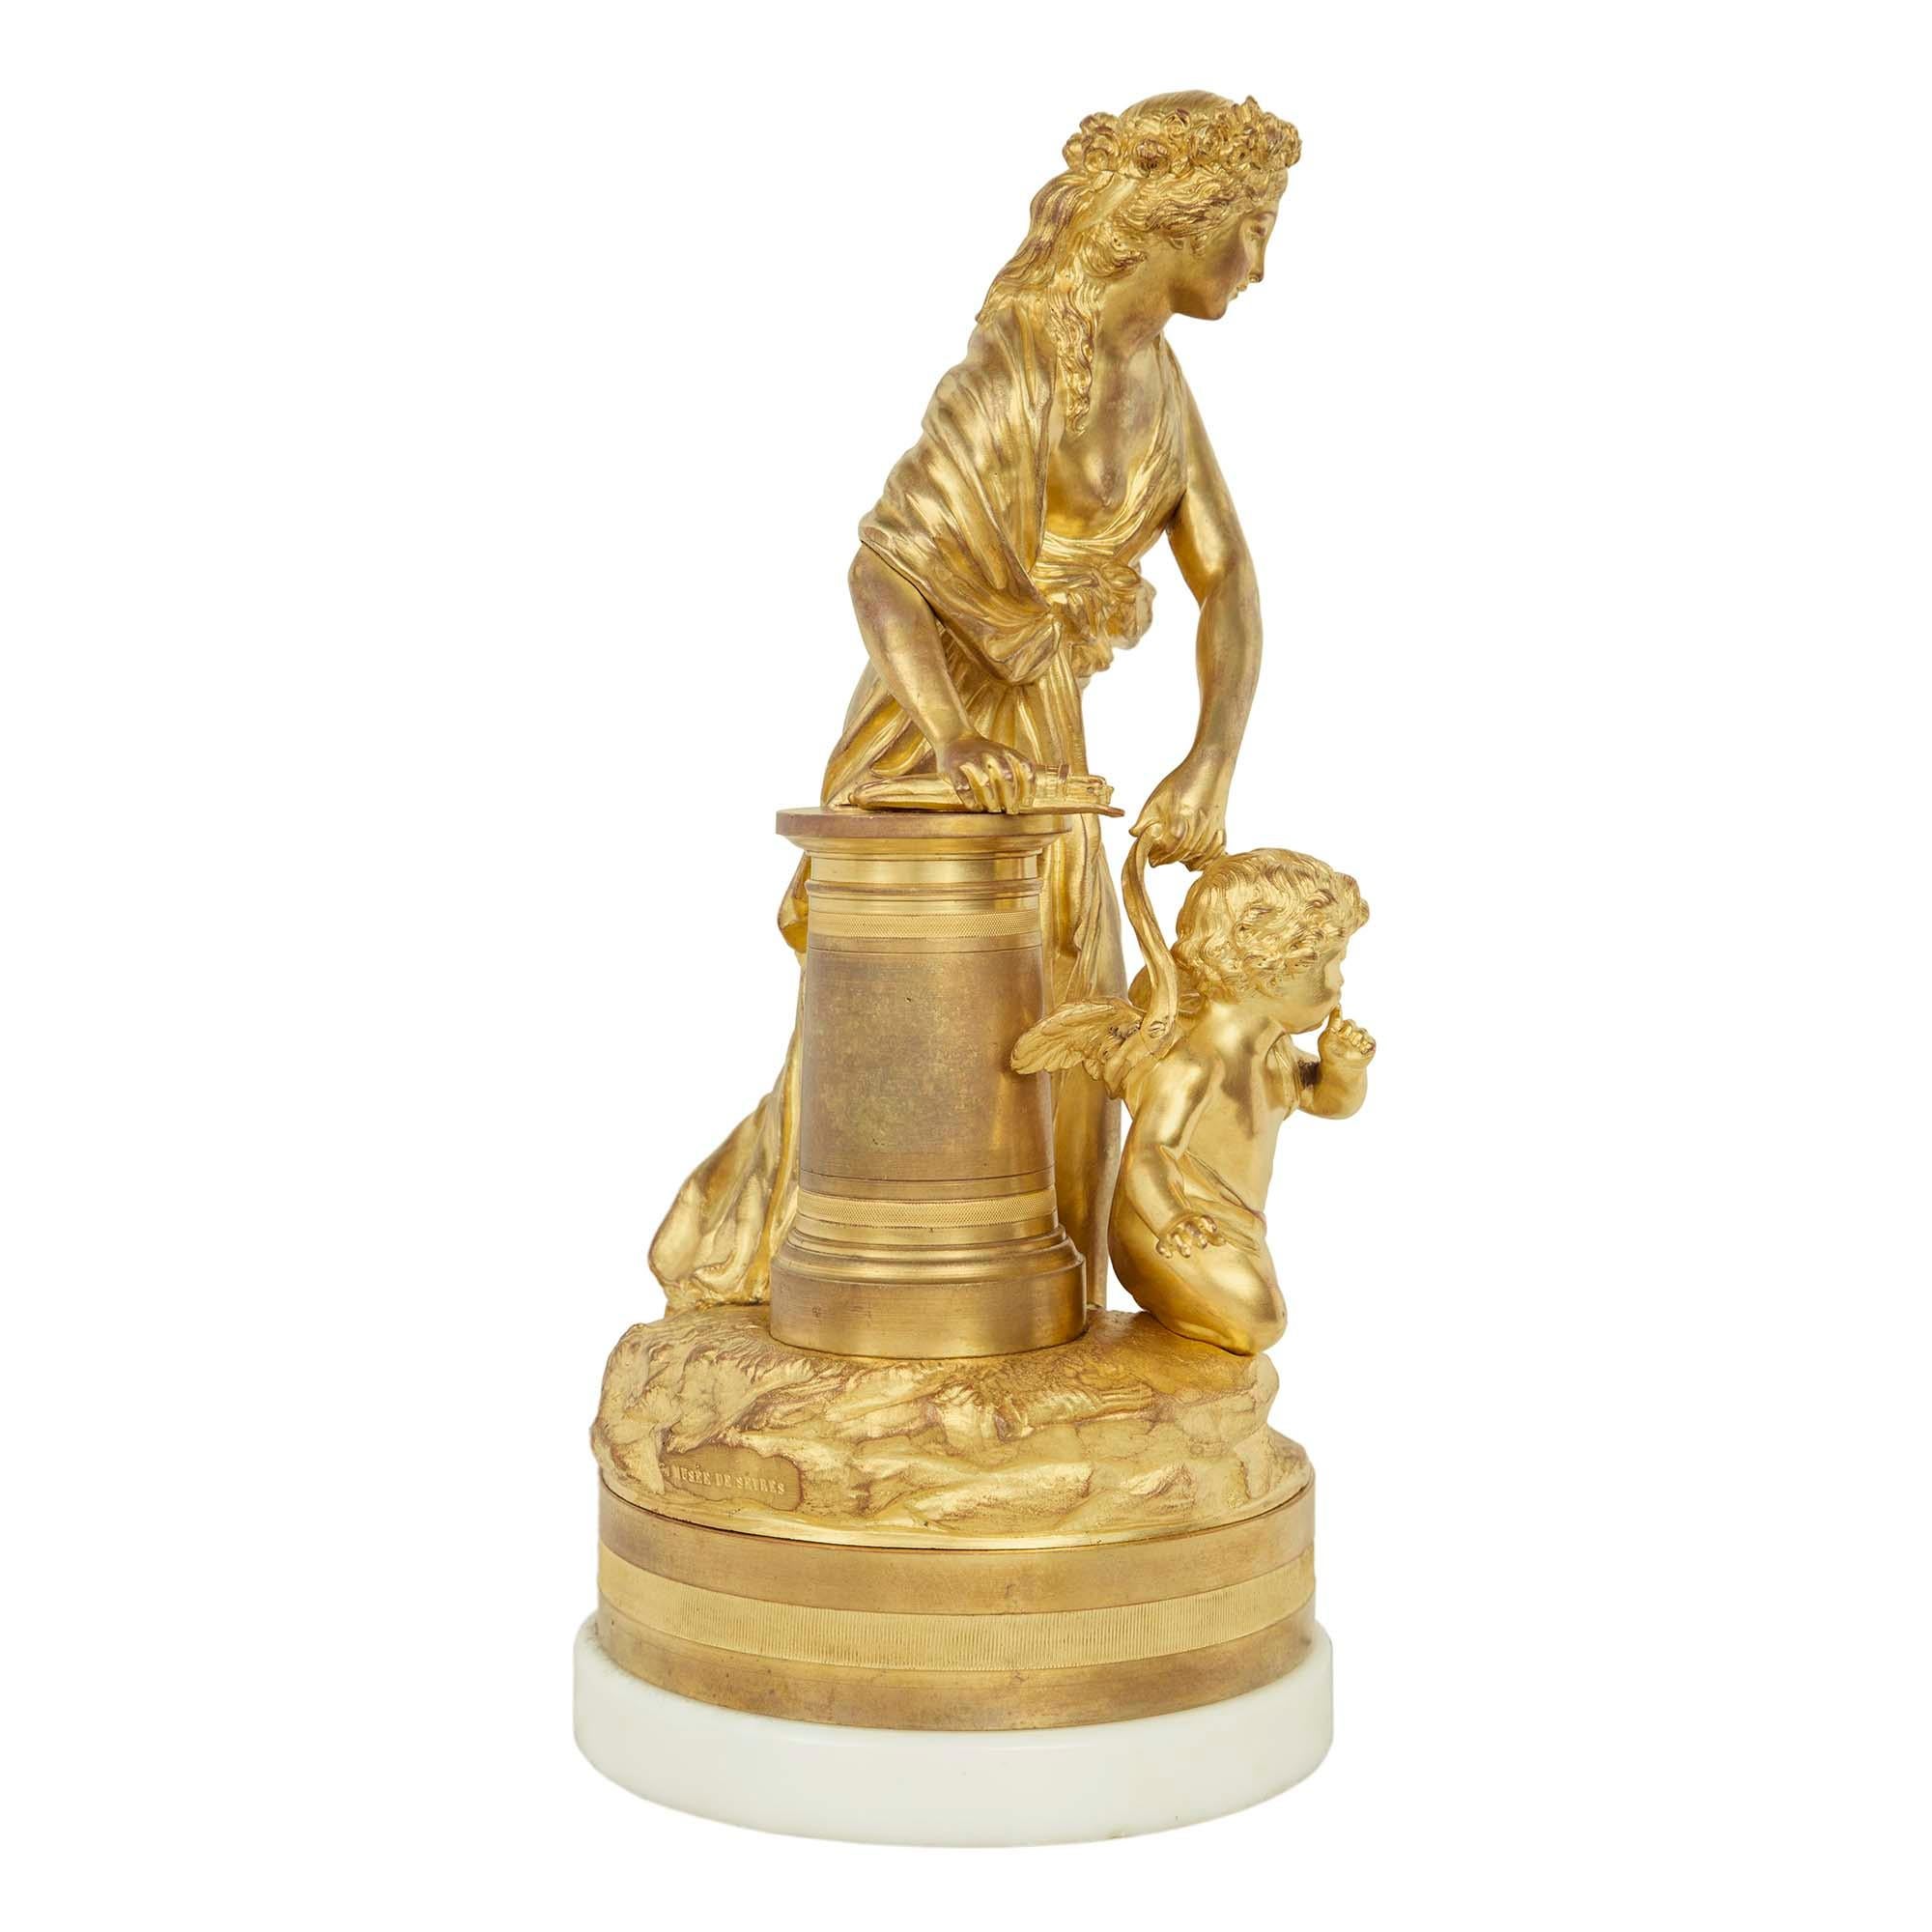 A high quality and most charming French 19th century Louis XVI st. ormolu statue of a maiden with winged cherub signed Musée de Sèvres. The statue is raised by a circular white Carrara marble base below the ormolu support with a wrap around reeded